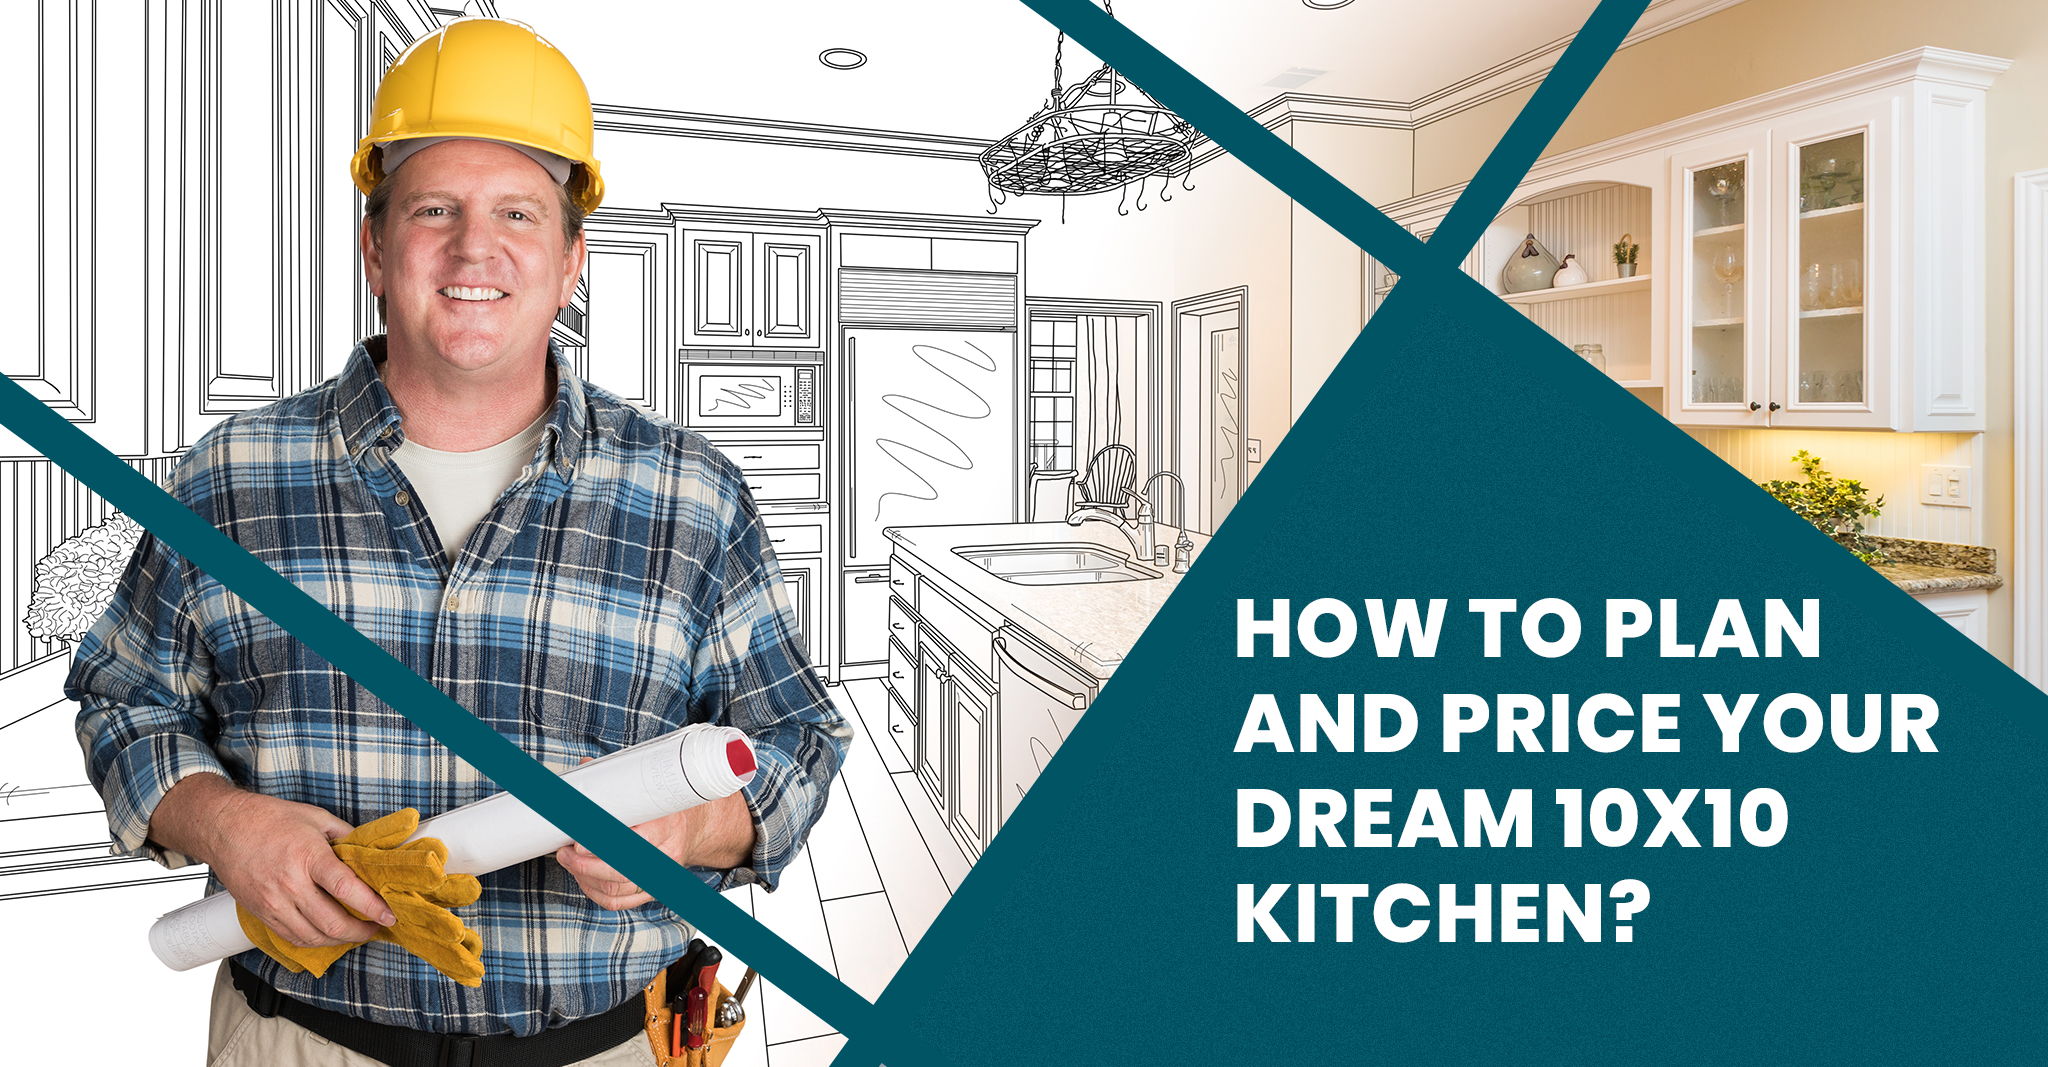 How to Plan and Price Your Dream 10x10 Kitchen